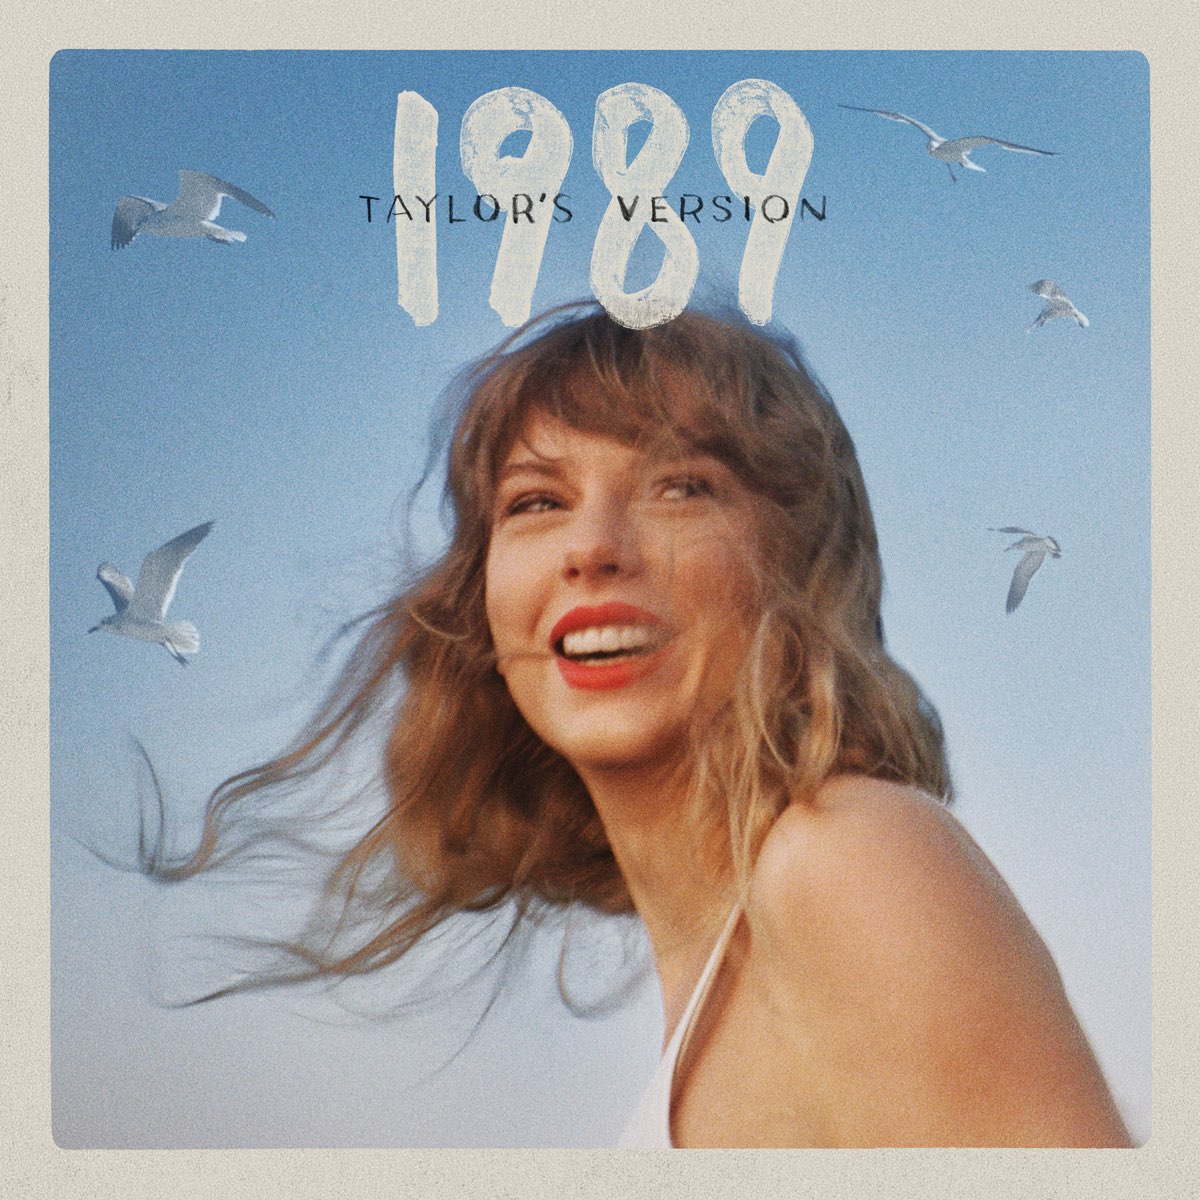 1989+%28Taylors+Version%29+allows+Swift+to+reclaim+her+2014+hit+album.+